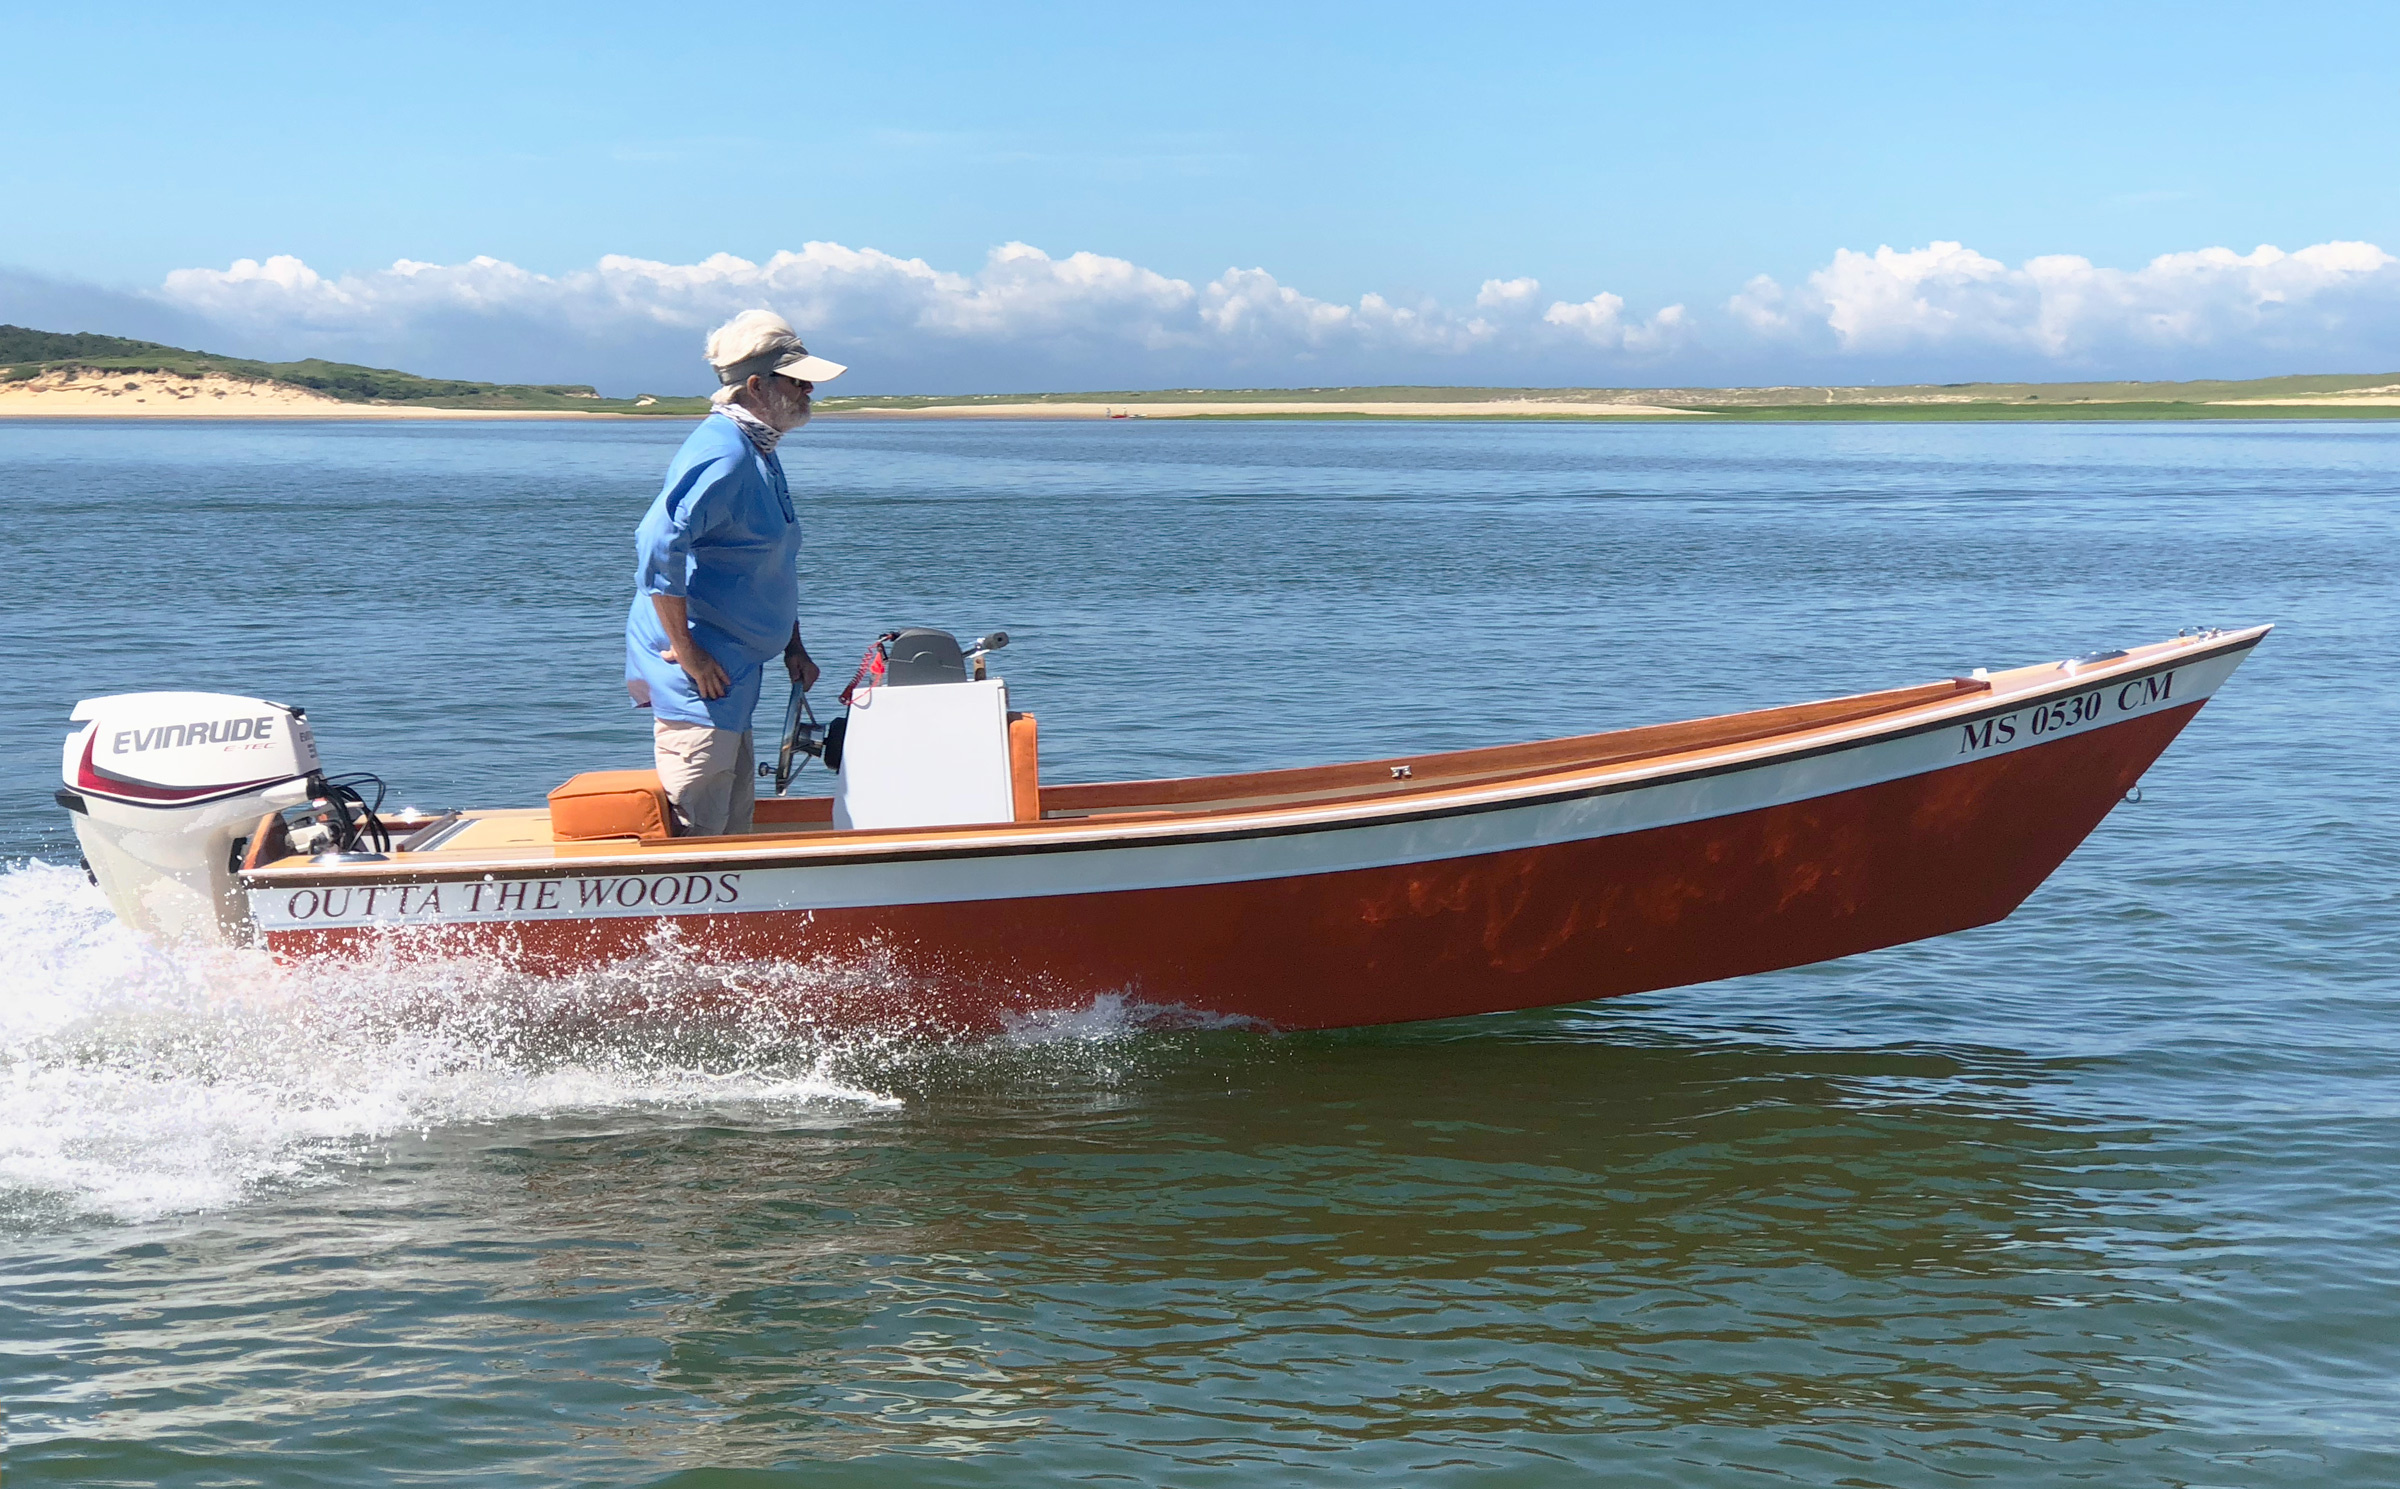 Skiff: The Nauset Marsh, A 16' stitch-and-glue outboard fishing boat. 2400x1490 HD Wallpaper.